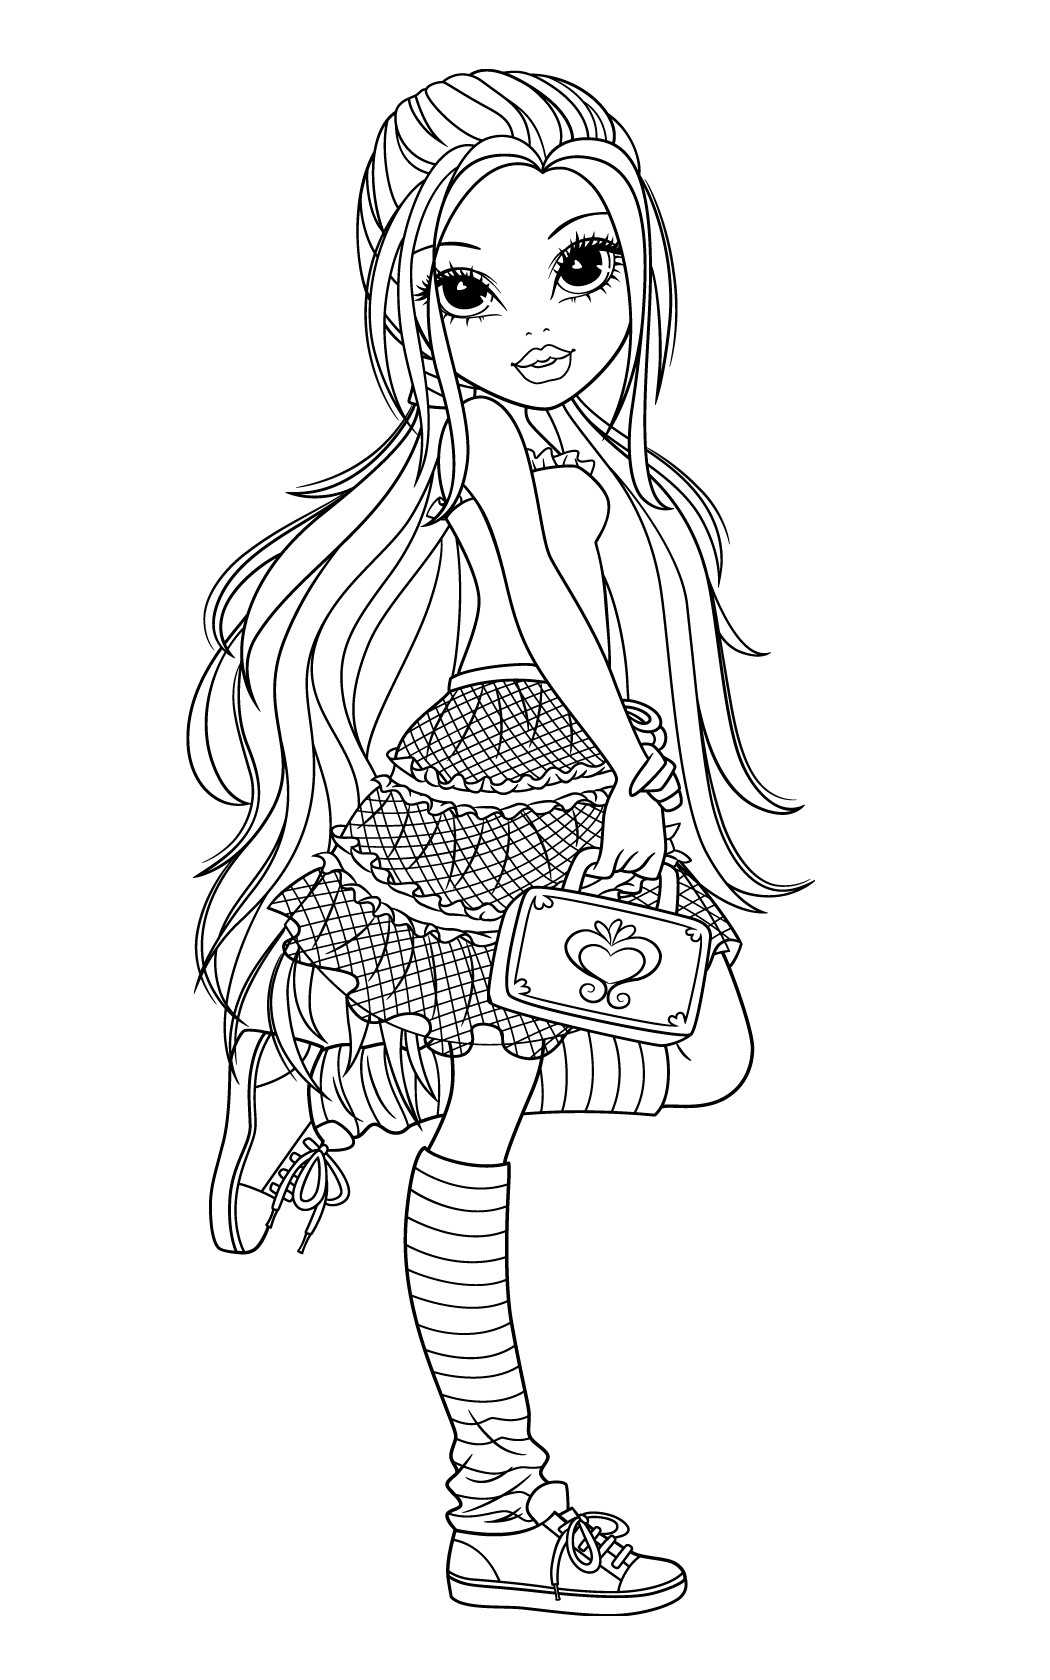 Free Printable Coloring Pages For Girls
 New Moxie Girlz Coloring Pages will be added frequently so